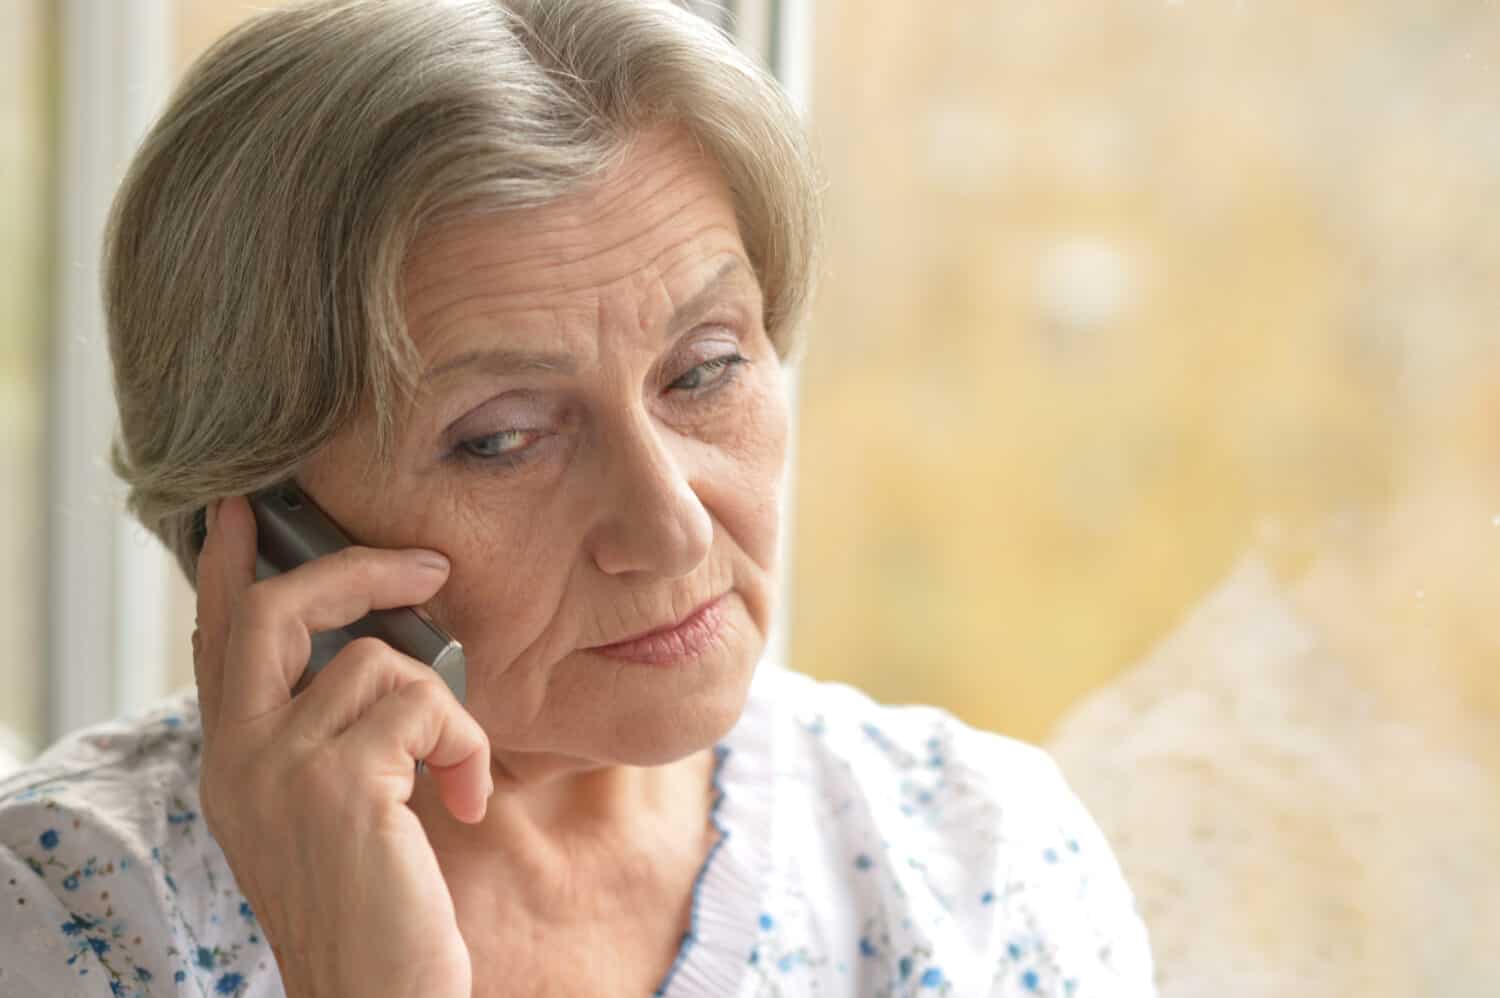 Miling senior woman calling on phone at home